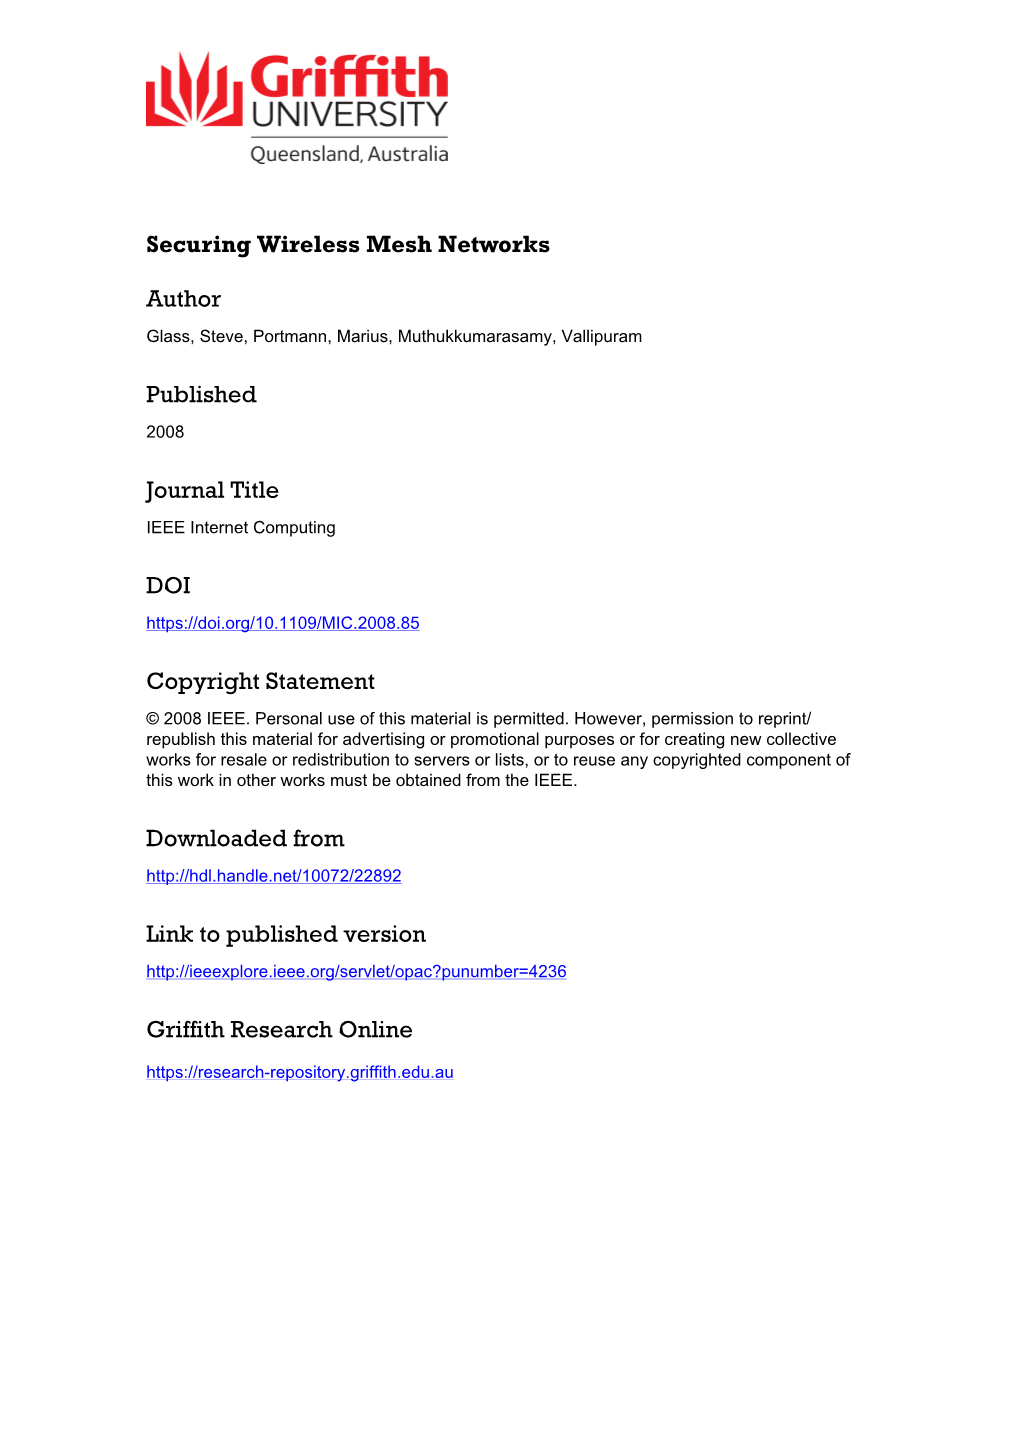 Securing Wireless Mesh Networks